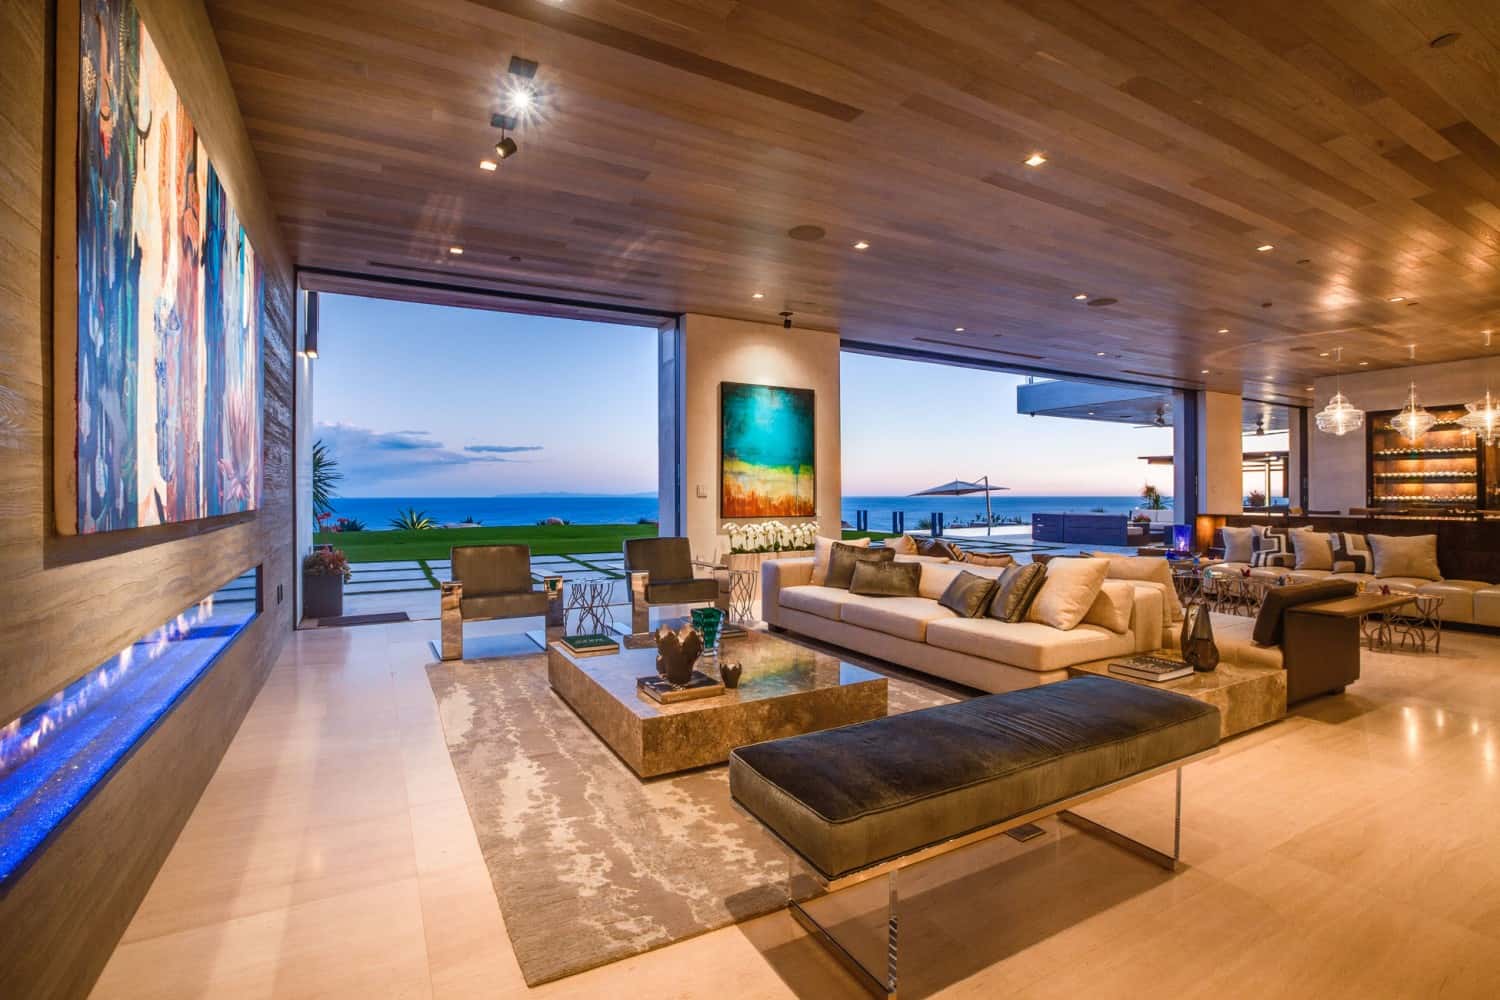 fance living room with ocean view through ceiling to floor windows | Gianna Provenzano